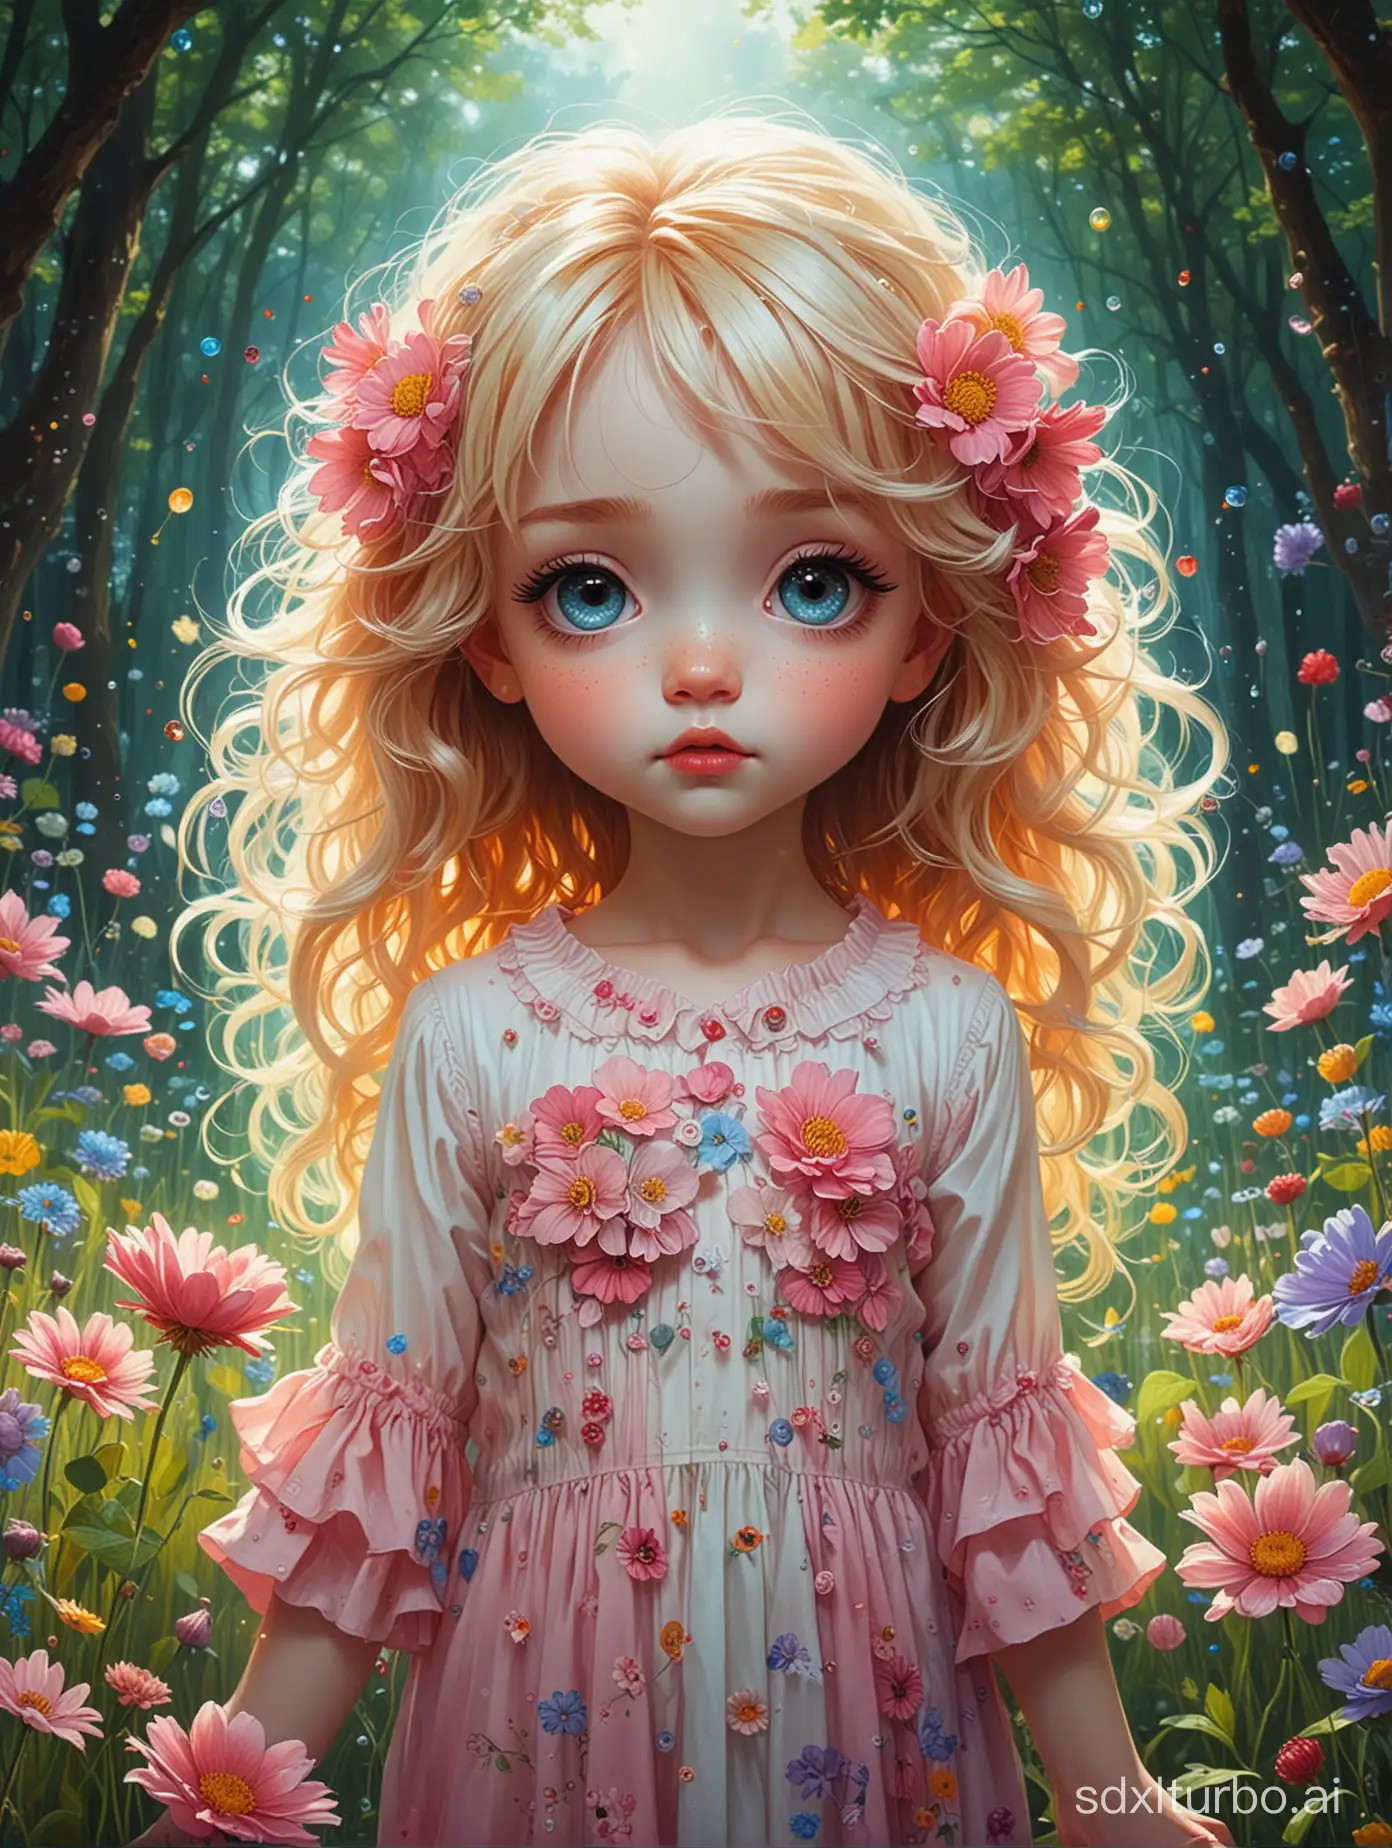 Chibi anime style
art by Yvonne Coomber
art by Meghan Howland
Art by Phil Koch